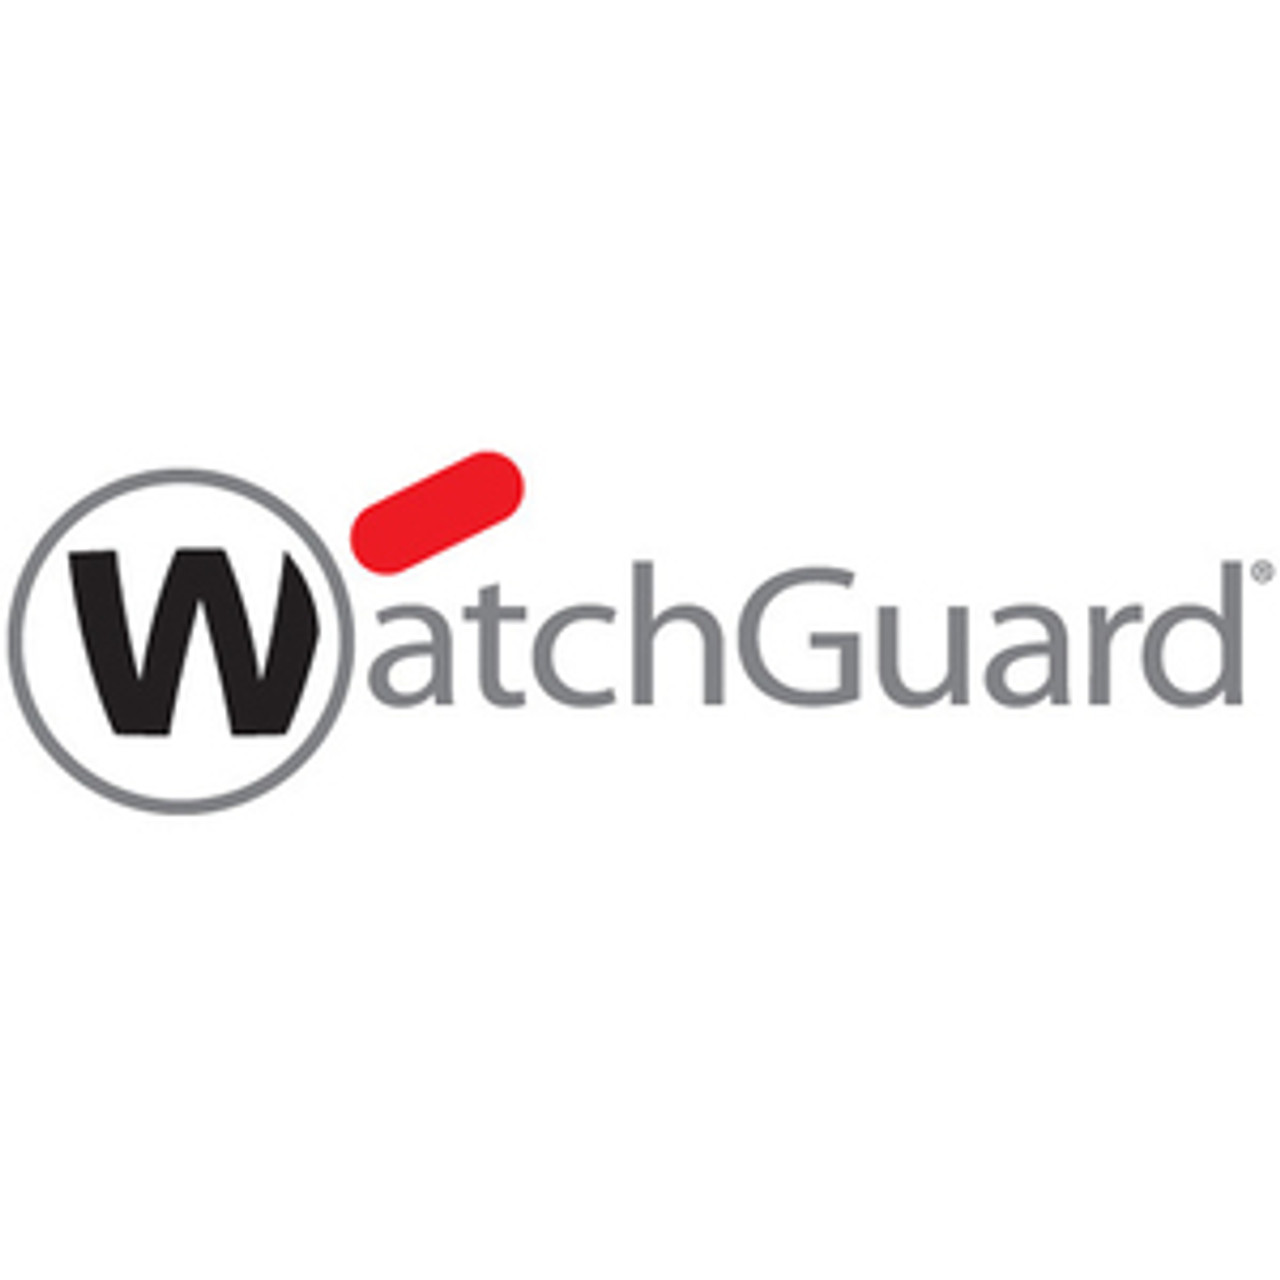 WatchGuard Basic Security Suite Renewal/Upgrade 3-yr for Firebox T15